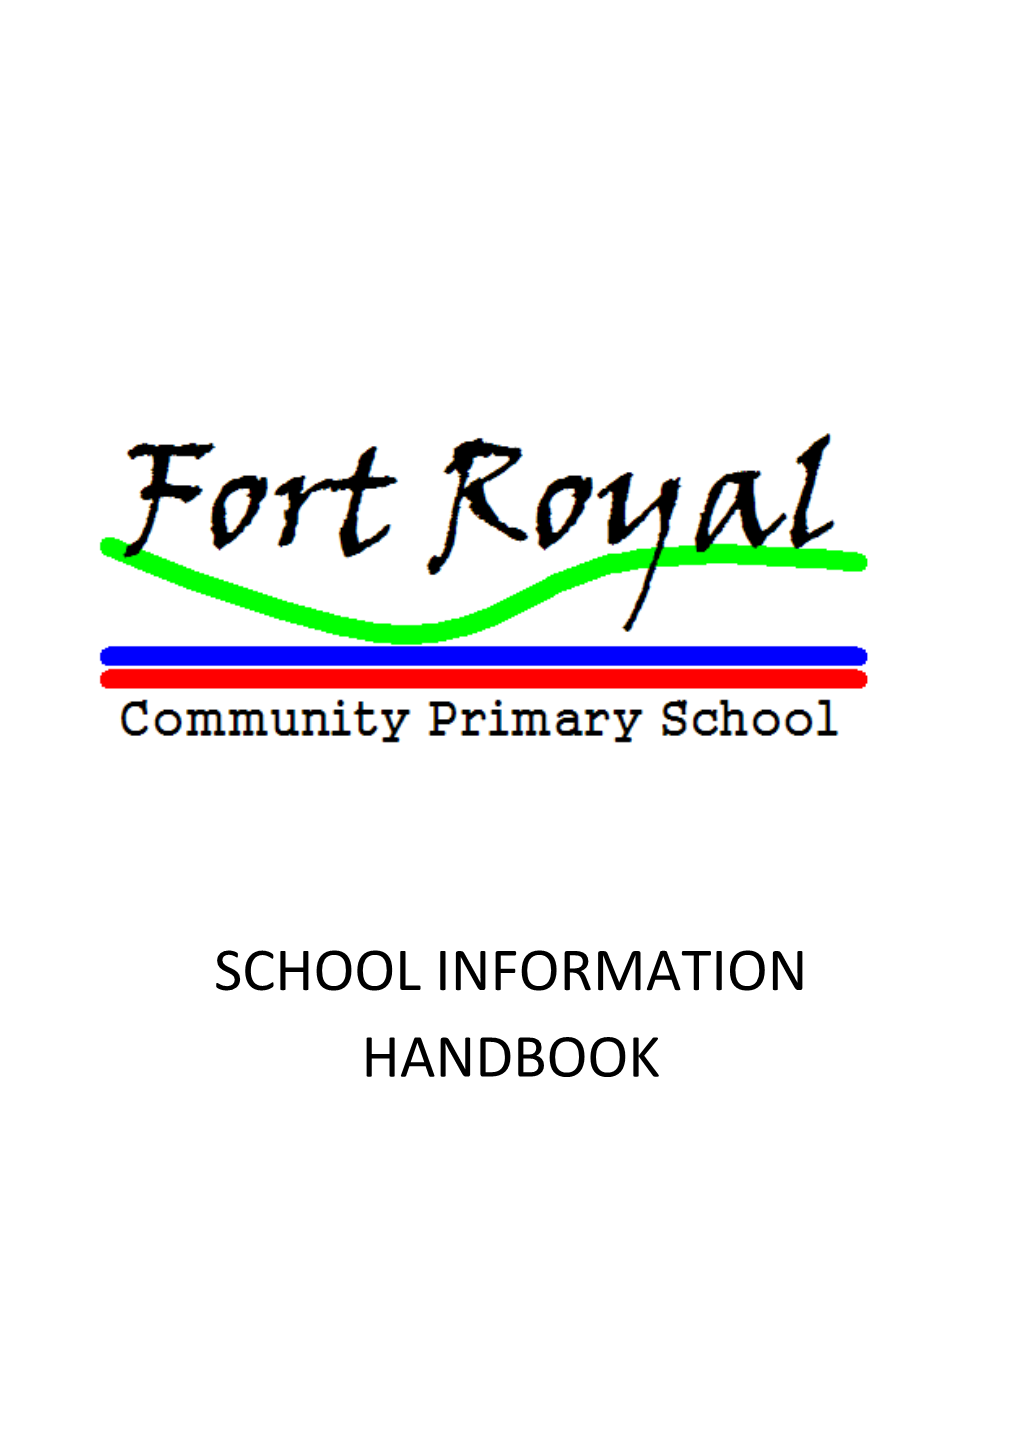 Welcome to Fort Royal Community Primary School